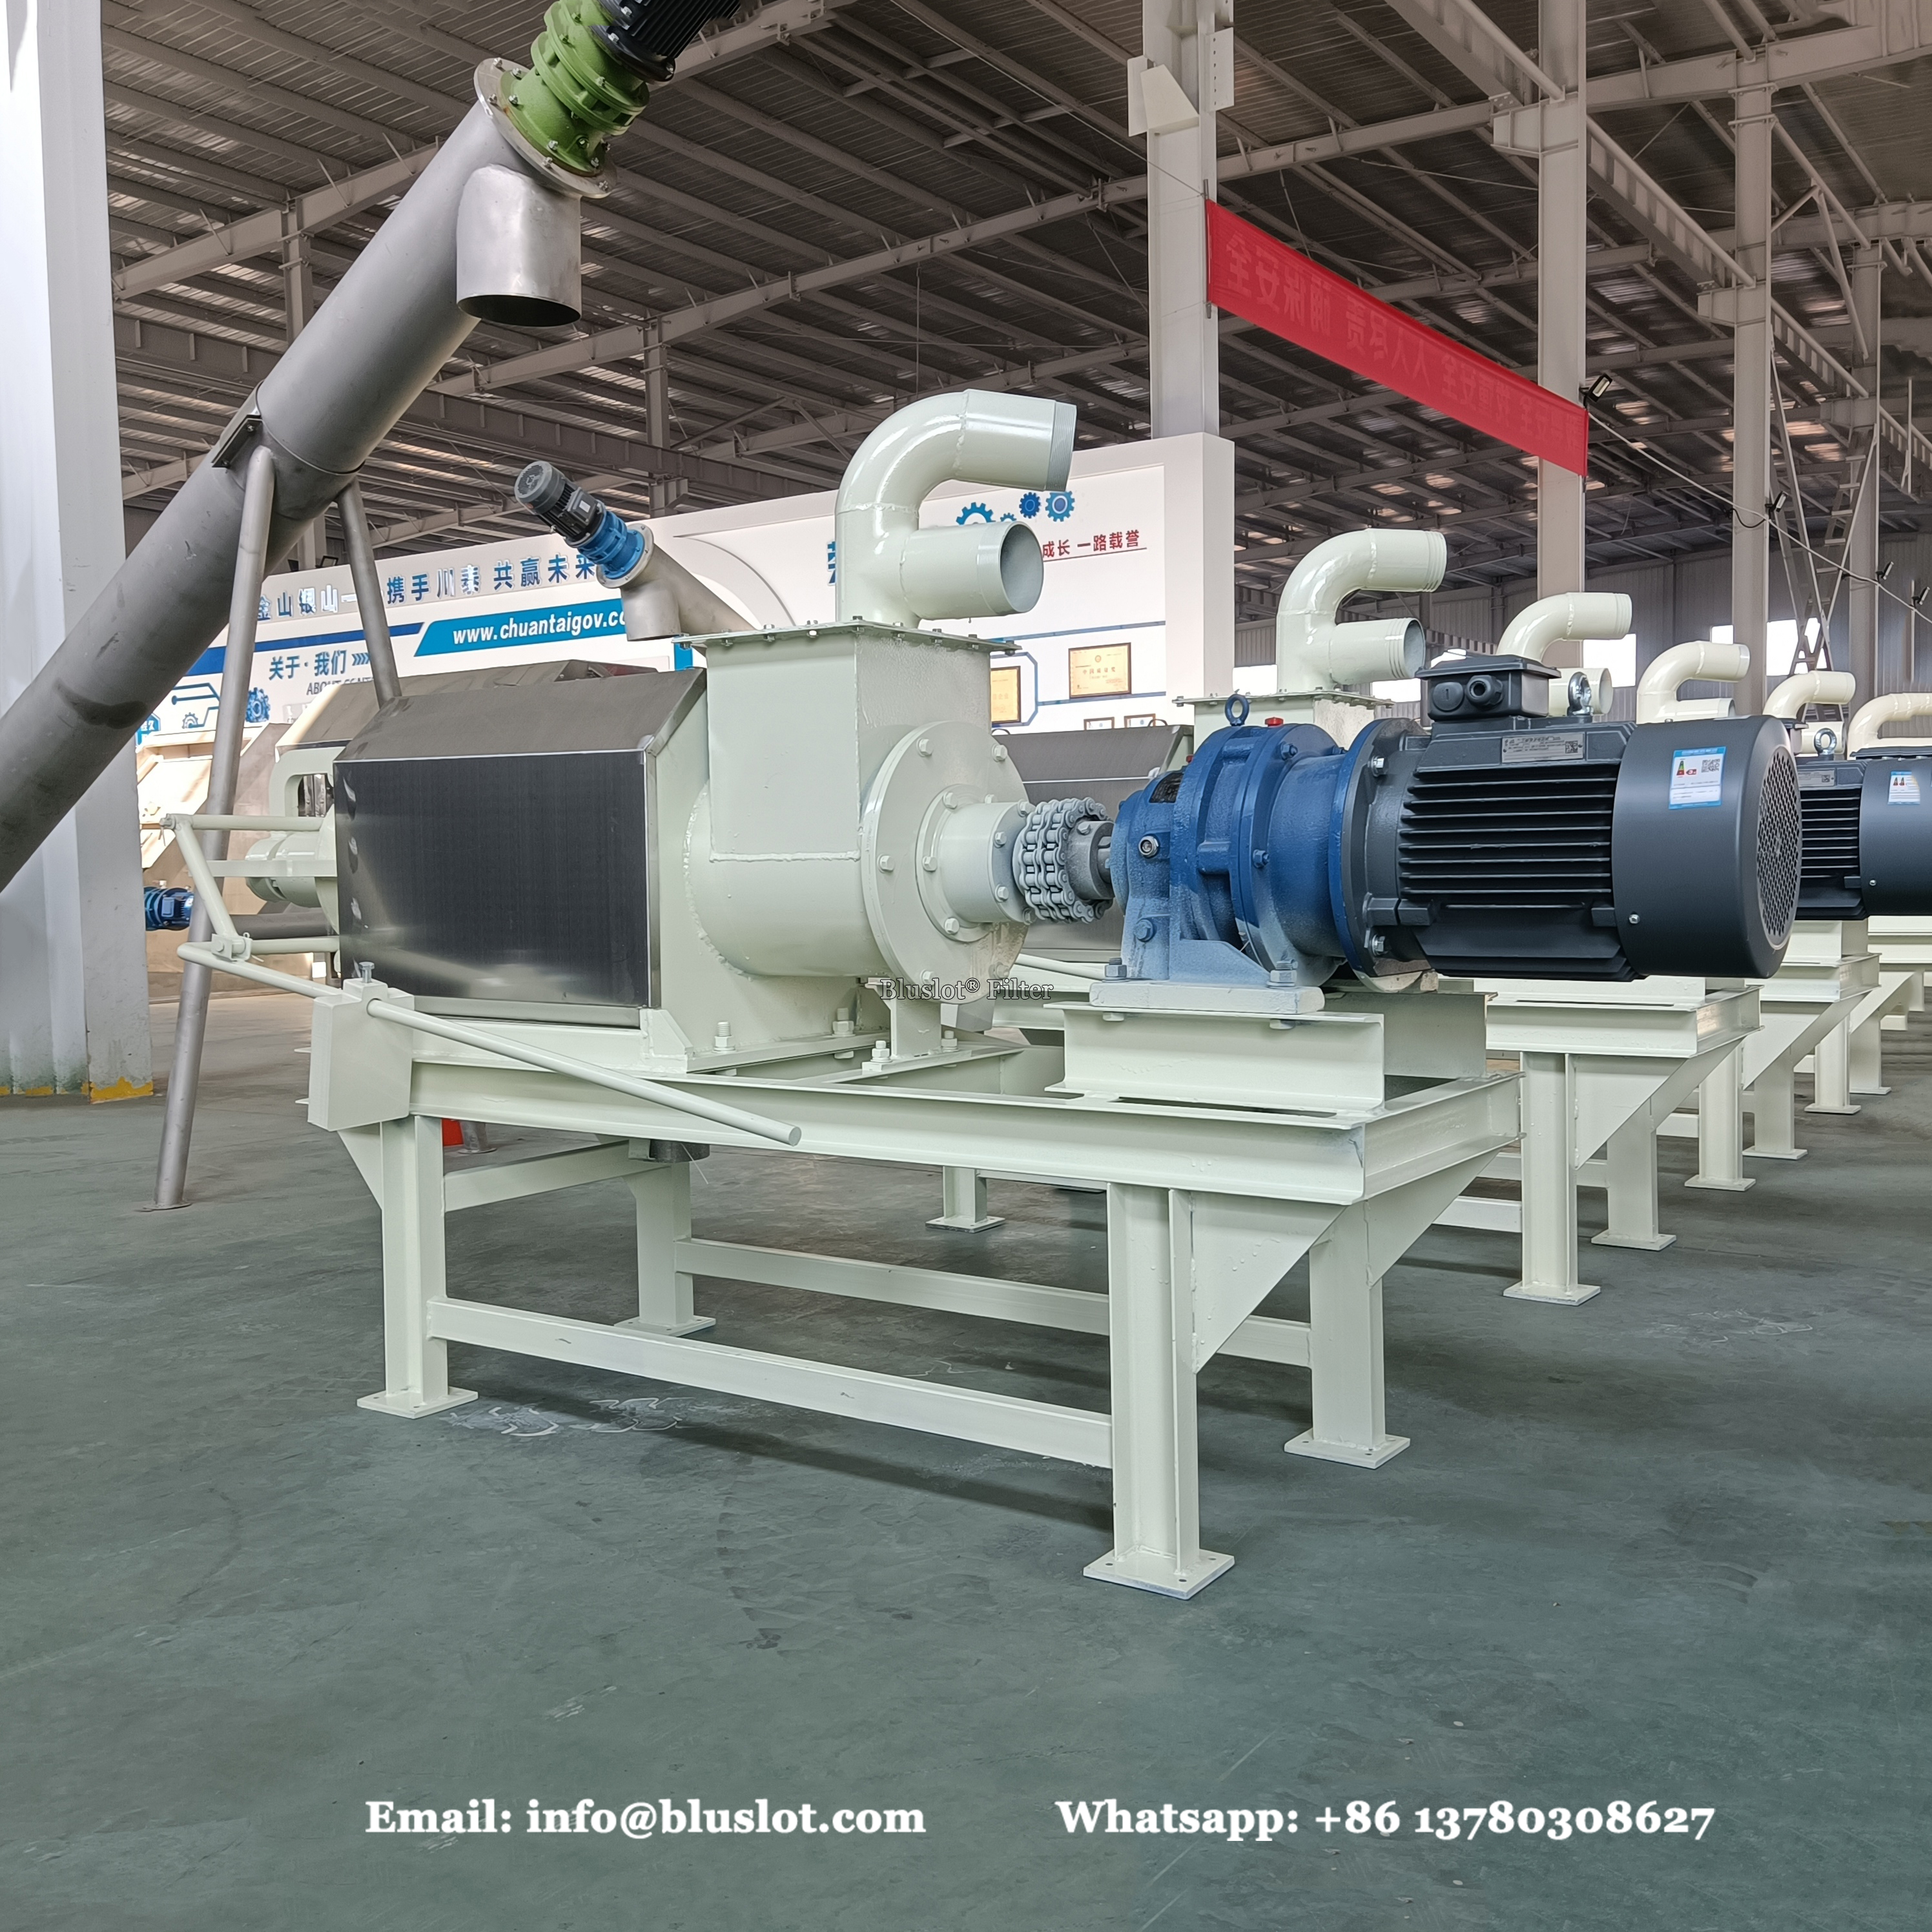 Manual Dewatering Screw Press adopts screw slag feeding and extrusion system. The separated dung residue is subject to secondary extrusion to re...